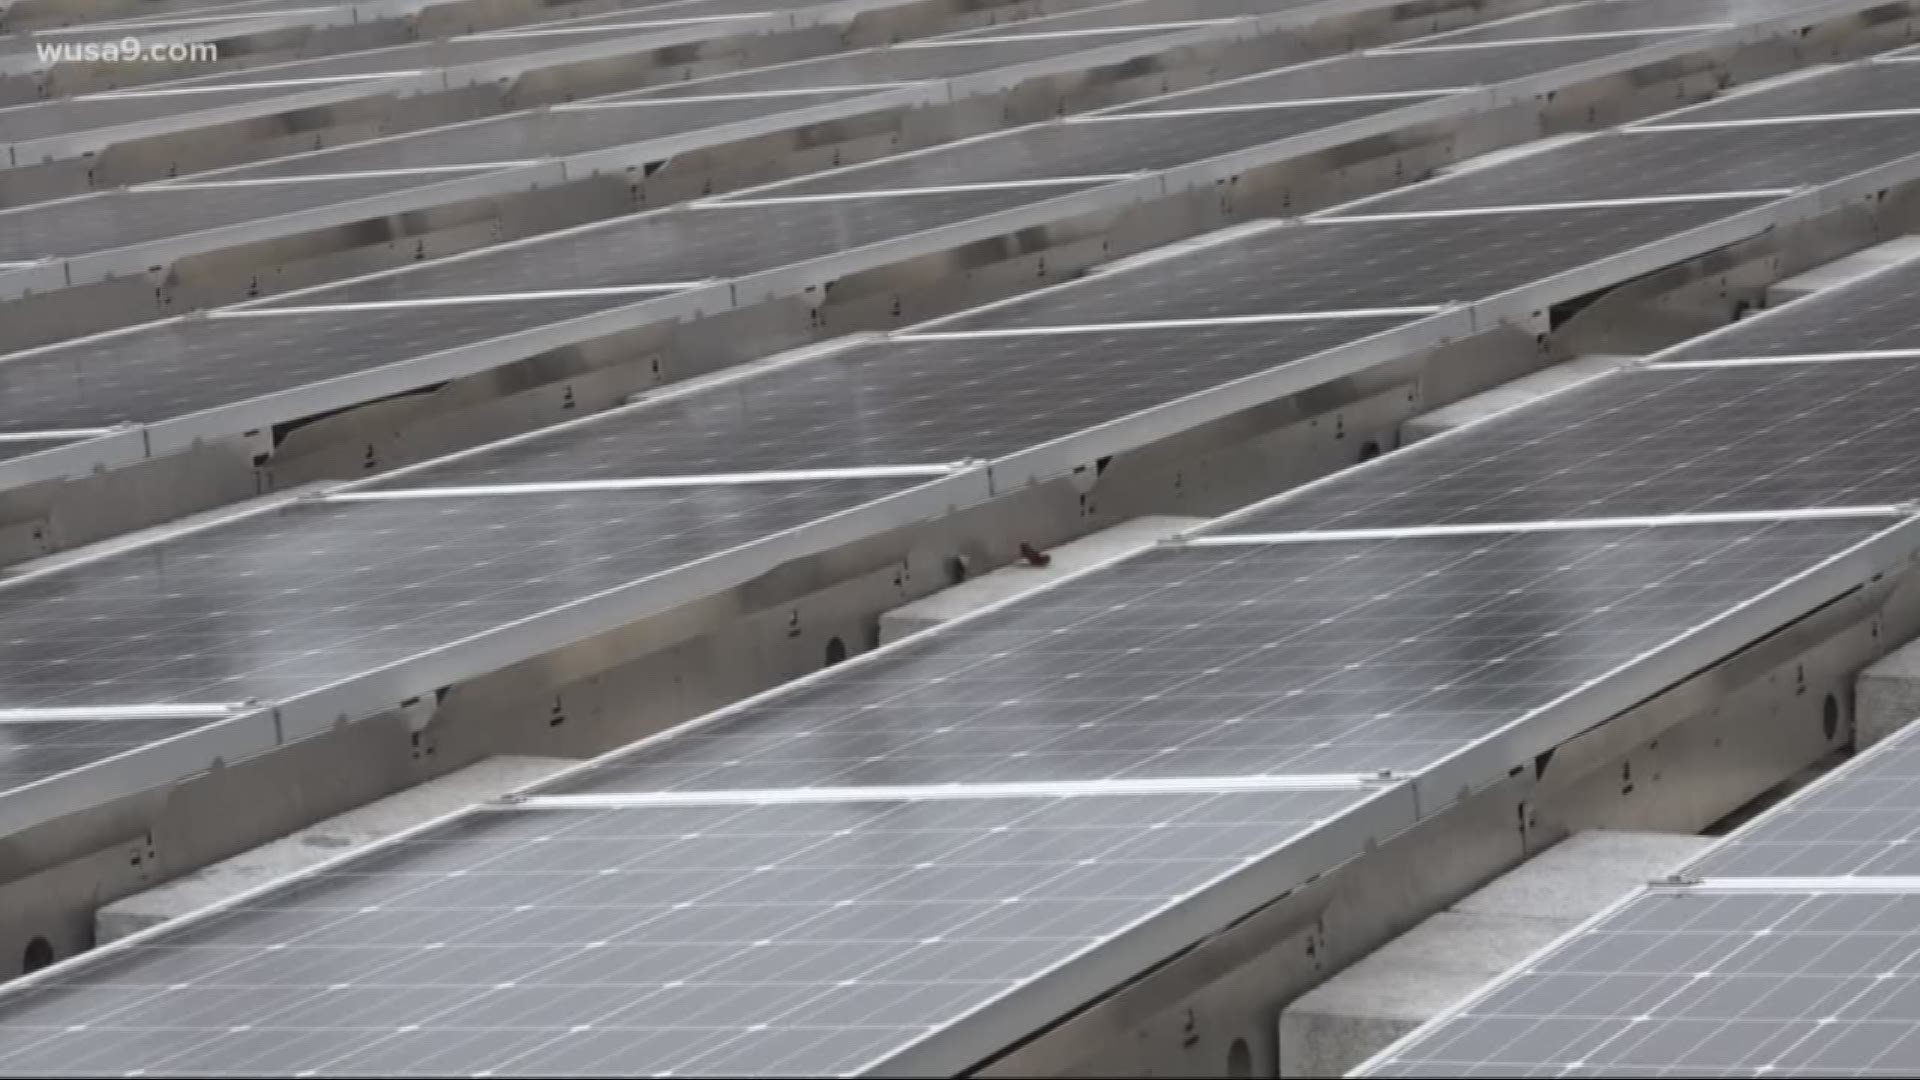 Arlington Public Schools signed a contract they say will save them millions of dollars. Five of their schools will be made over with solar panels.